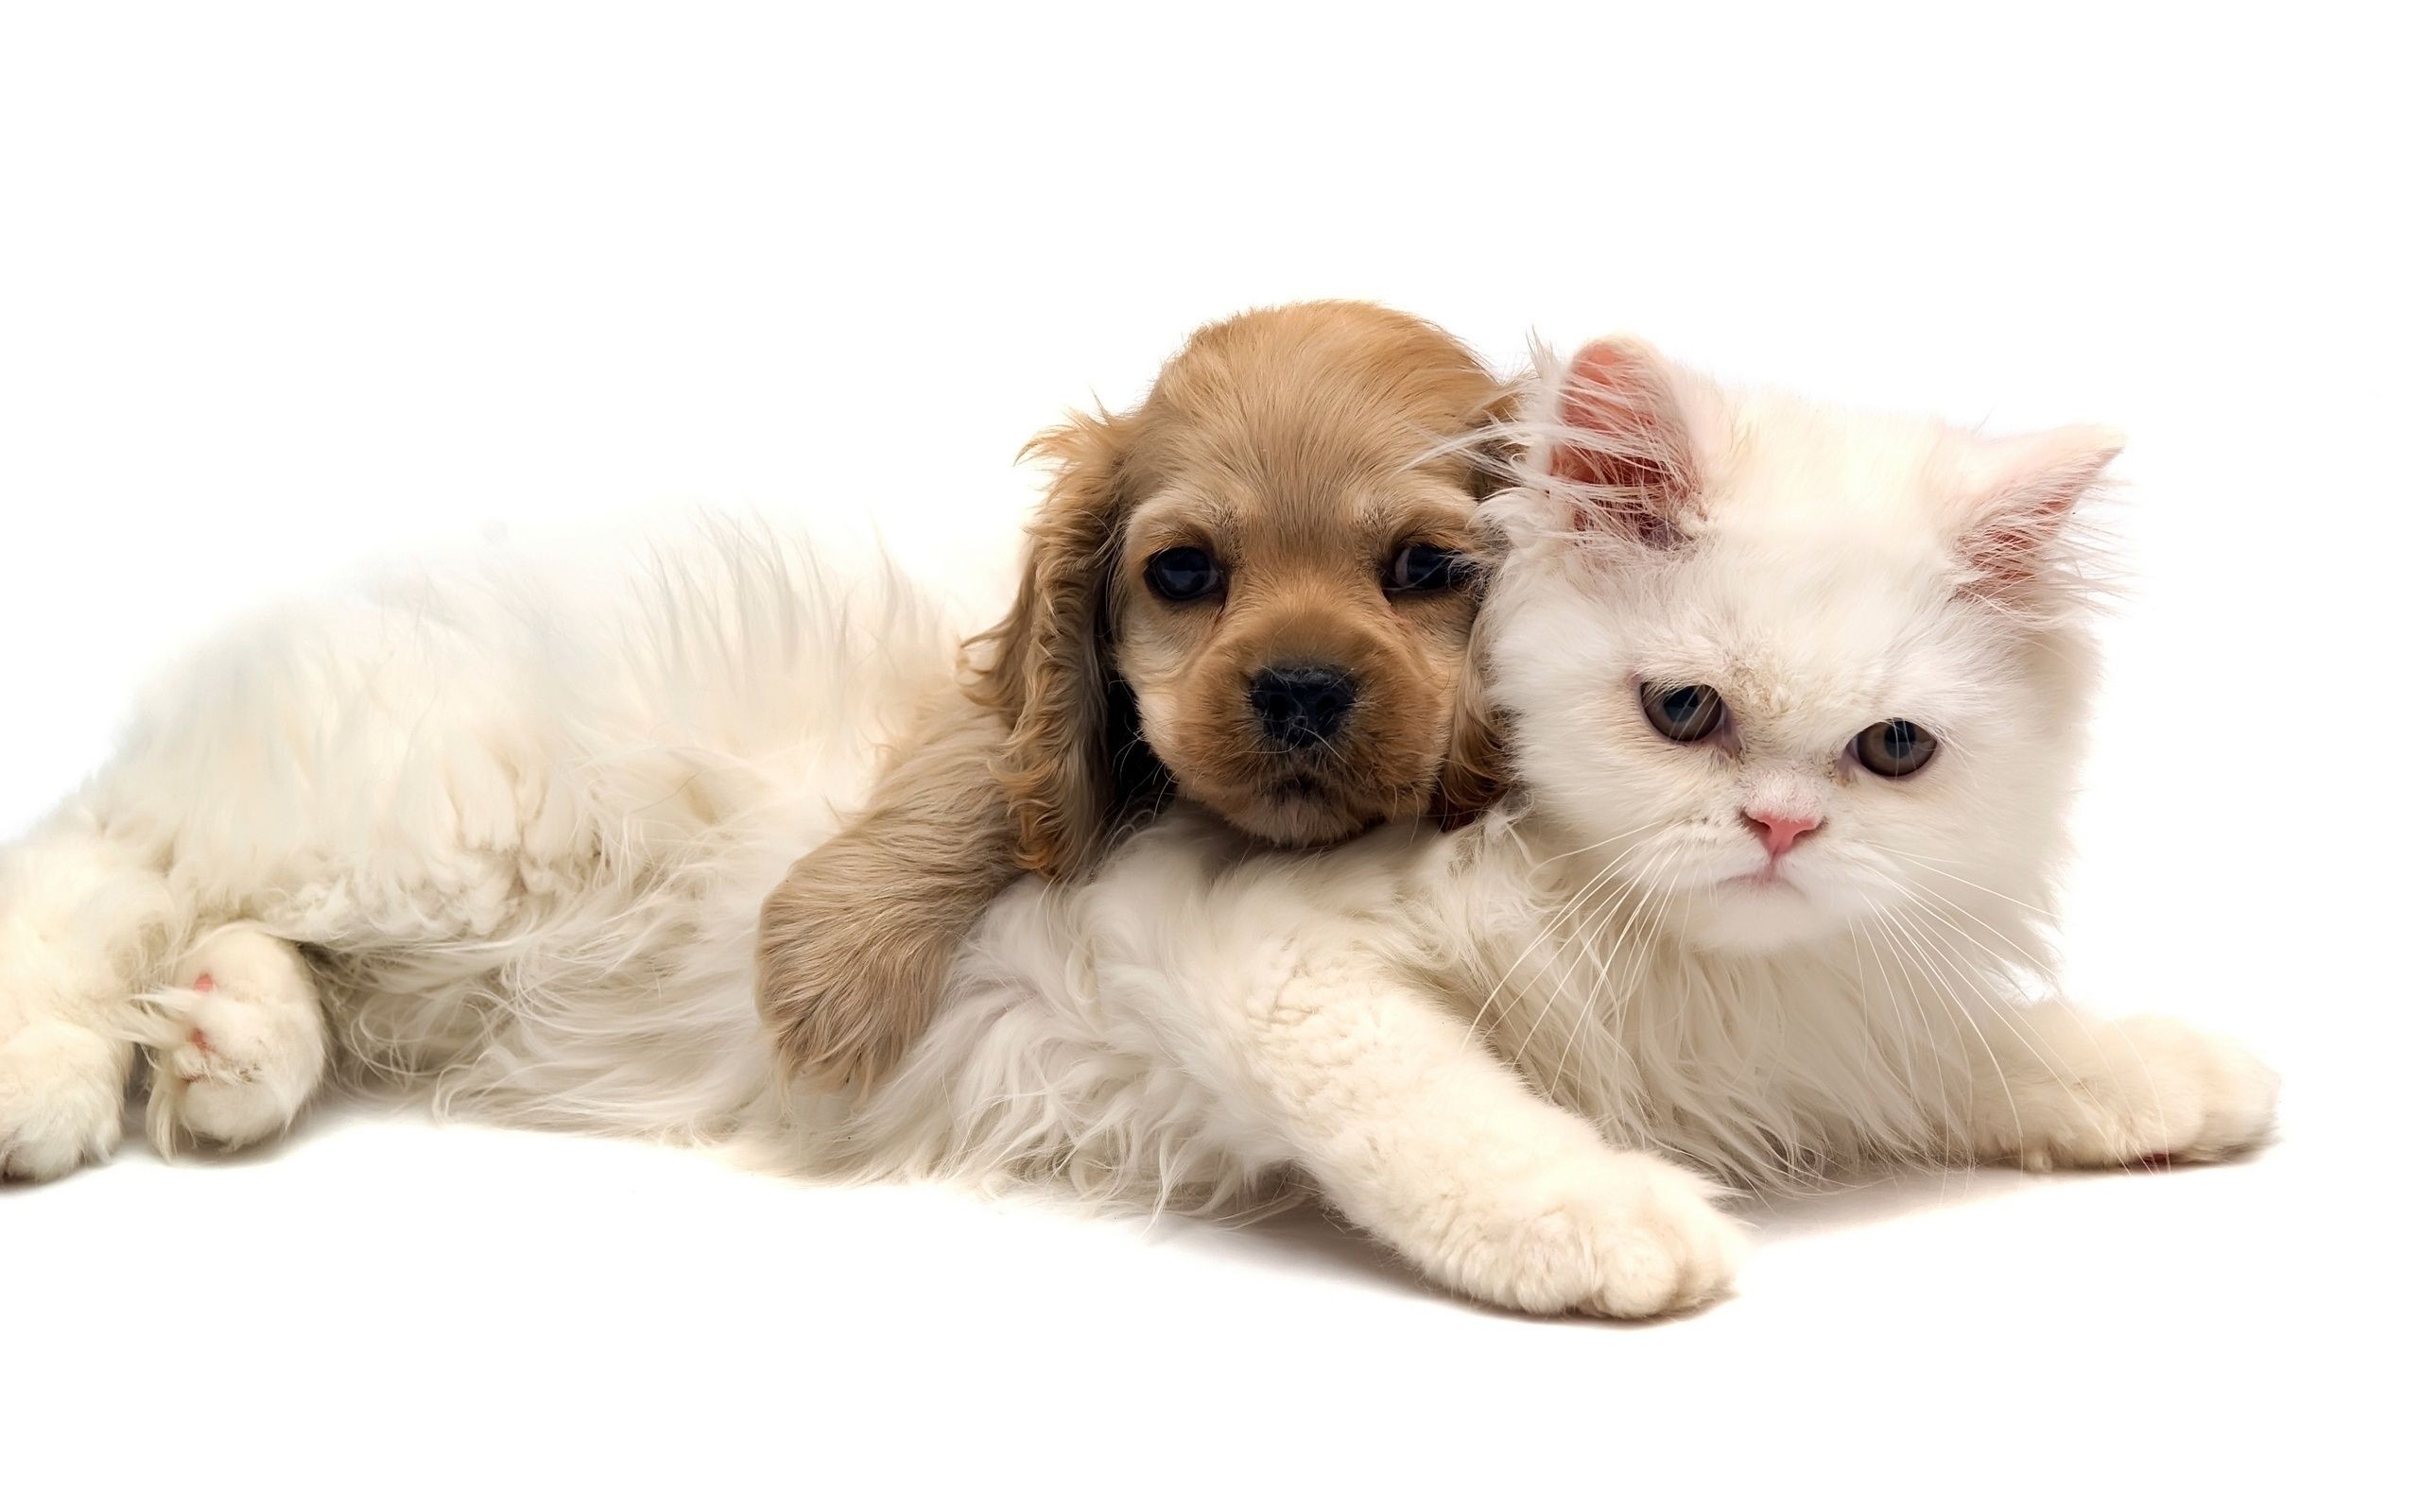 2560x1600 Title : baby cats and dogs pics wallpaper | big house | pinterest | dog,  cat. Dimension : 2560 x 1600. File Type : JPG/JPEG